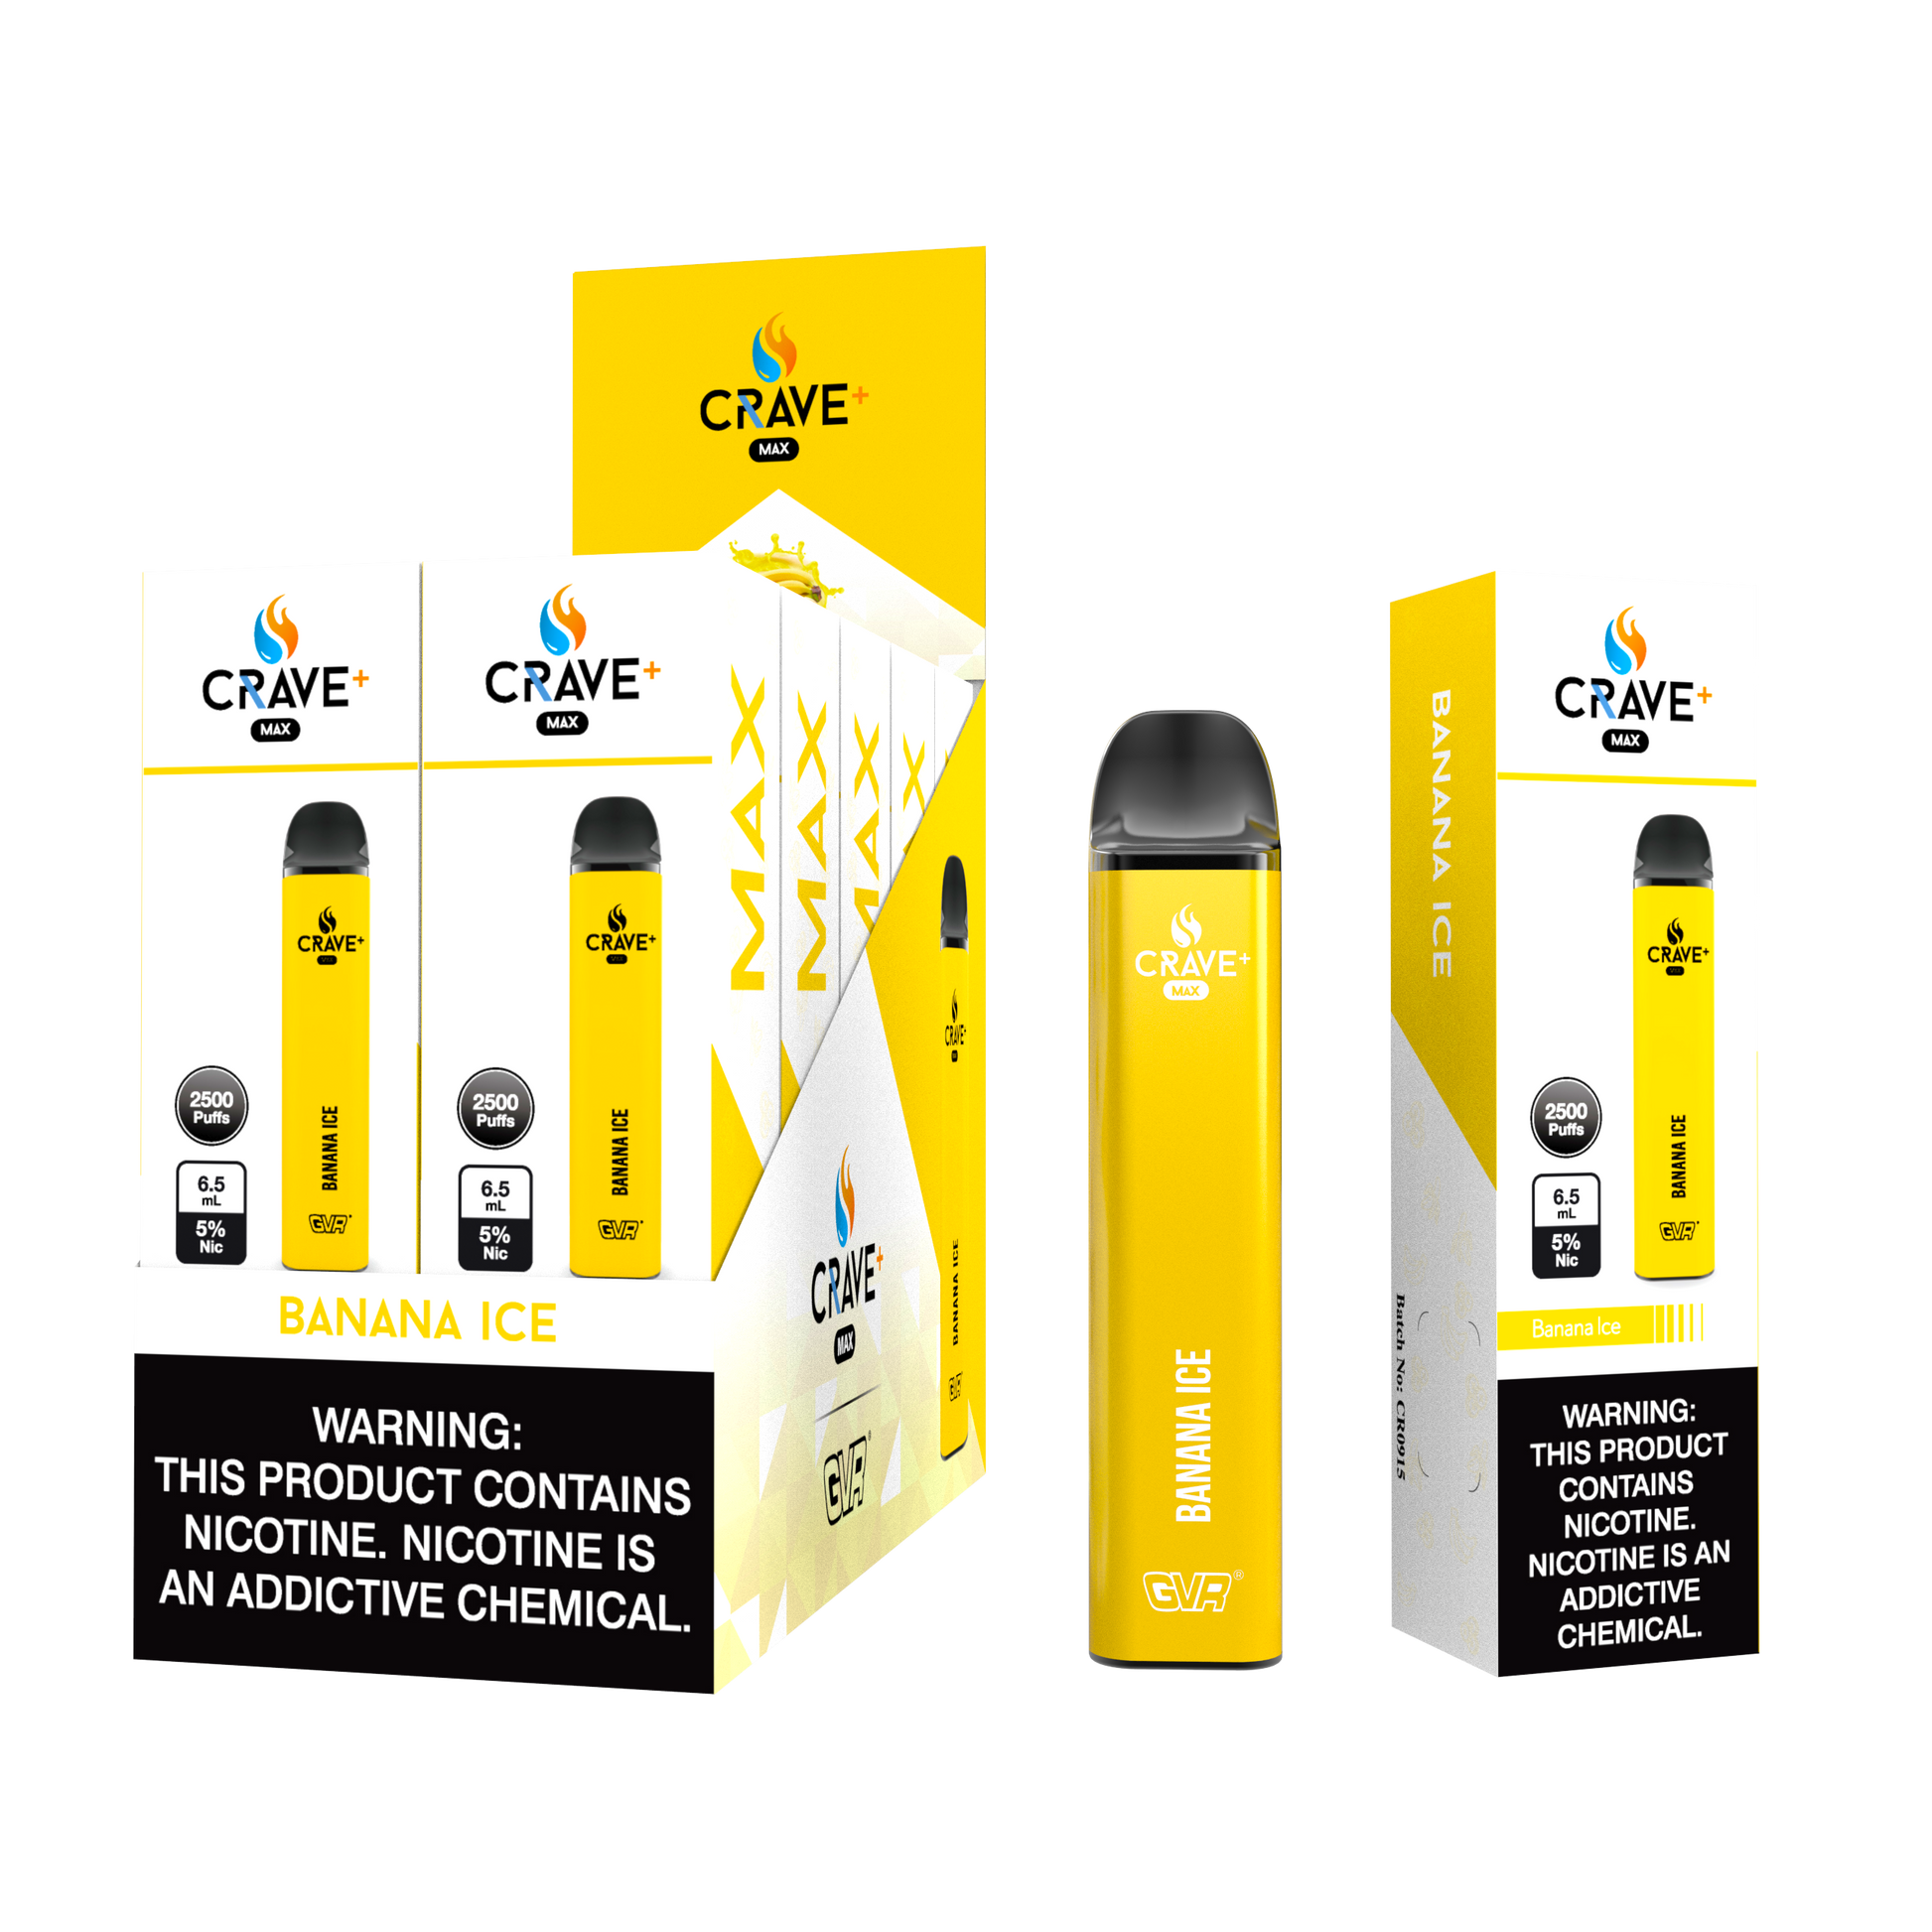 crave max, crave vape, buy crave max, crave max for sale, crave max flavors, crave flavors vape, buy crave vape online, crave max gvr, crave 2500 puffs, crave max banana, crave max banana ice, banana ice crave, banana ice crave max, crave banana ice vape, crave disposable